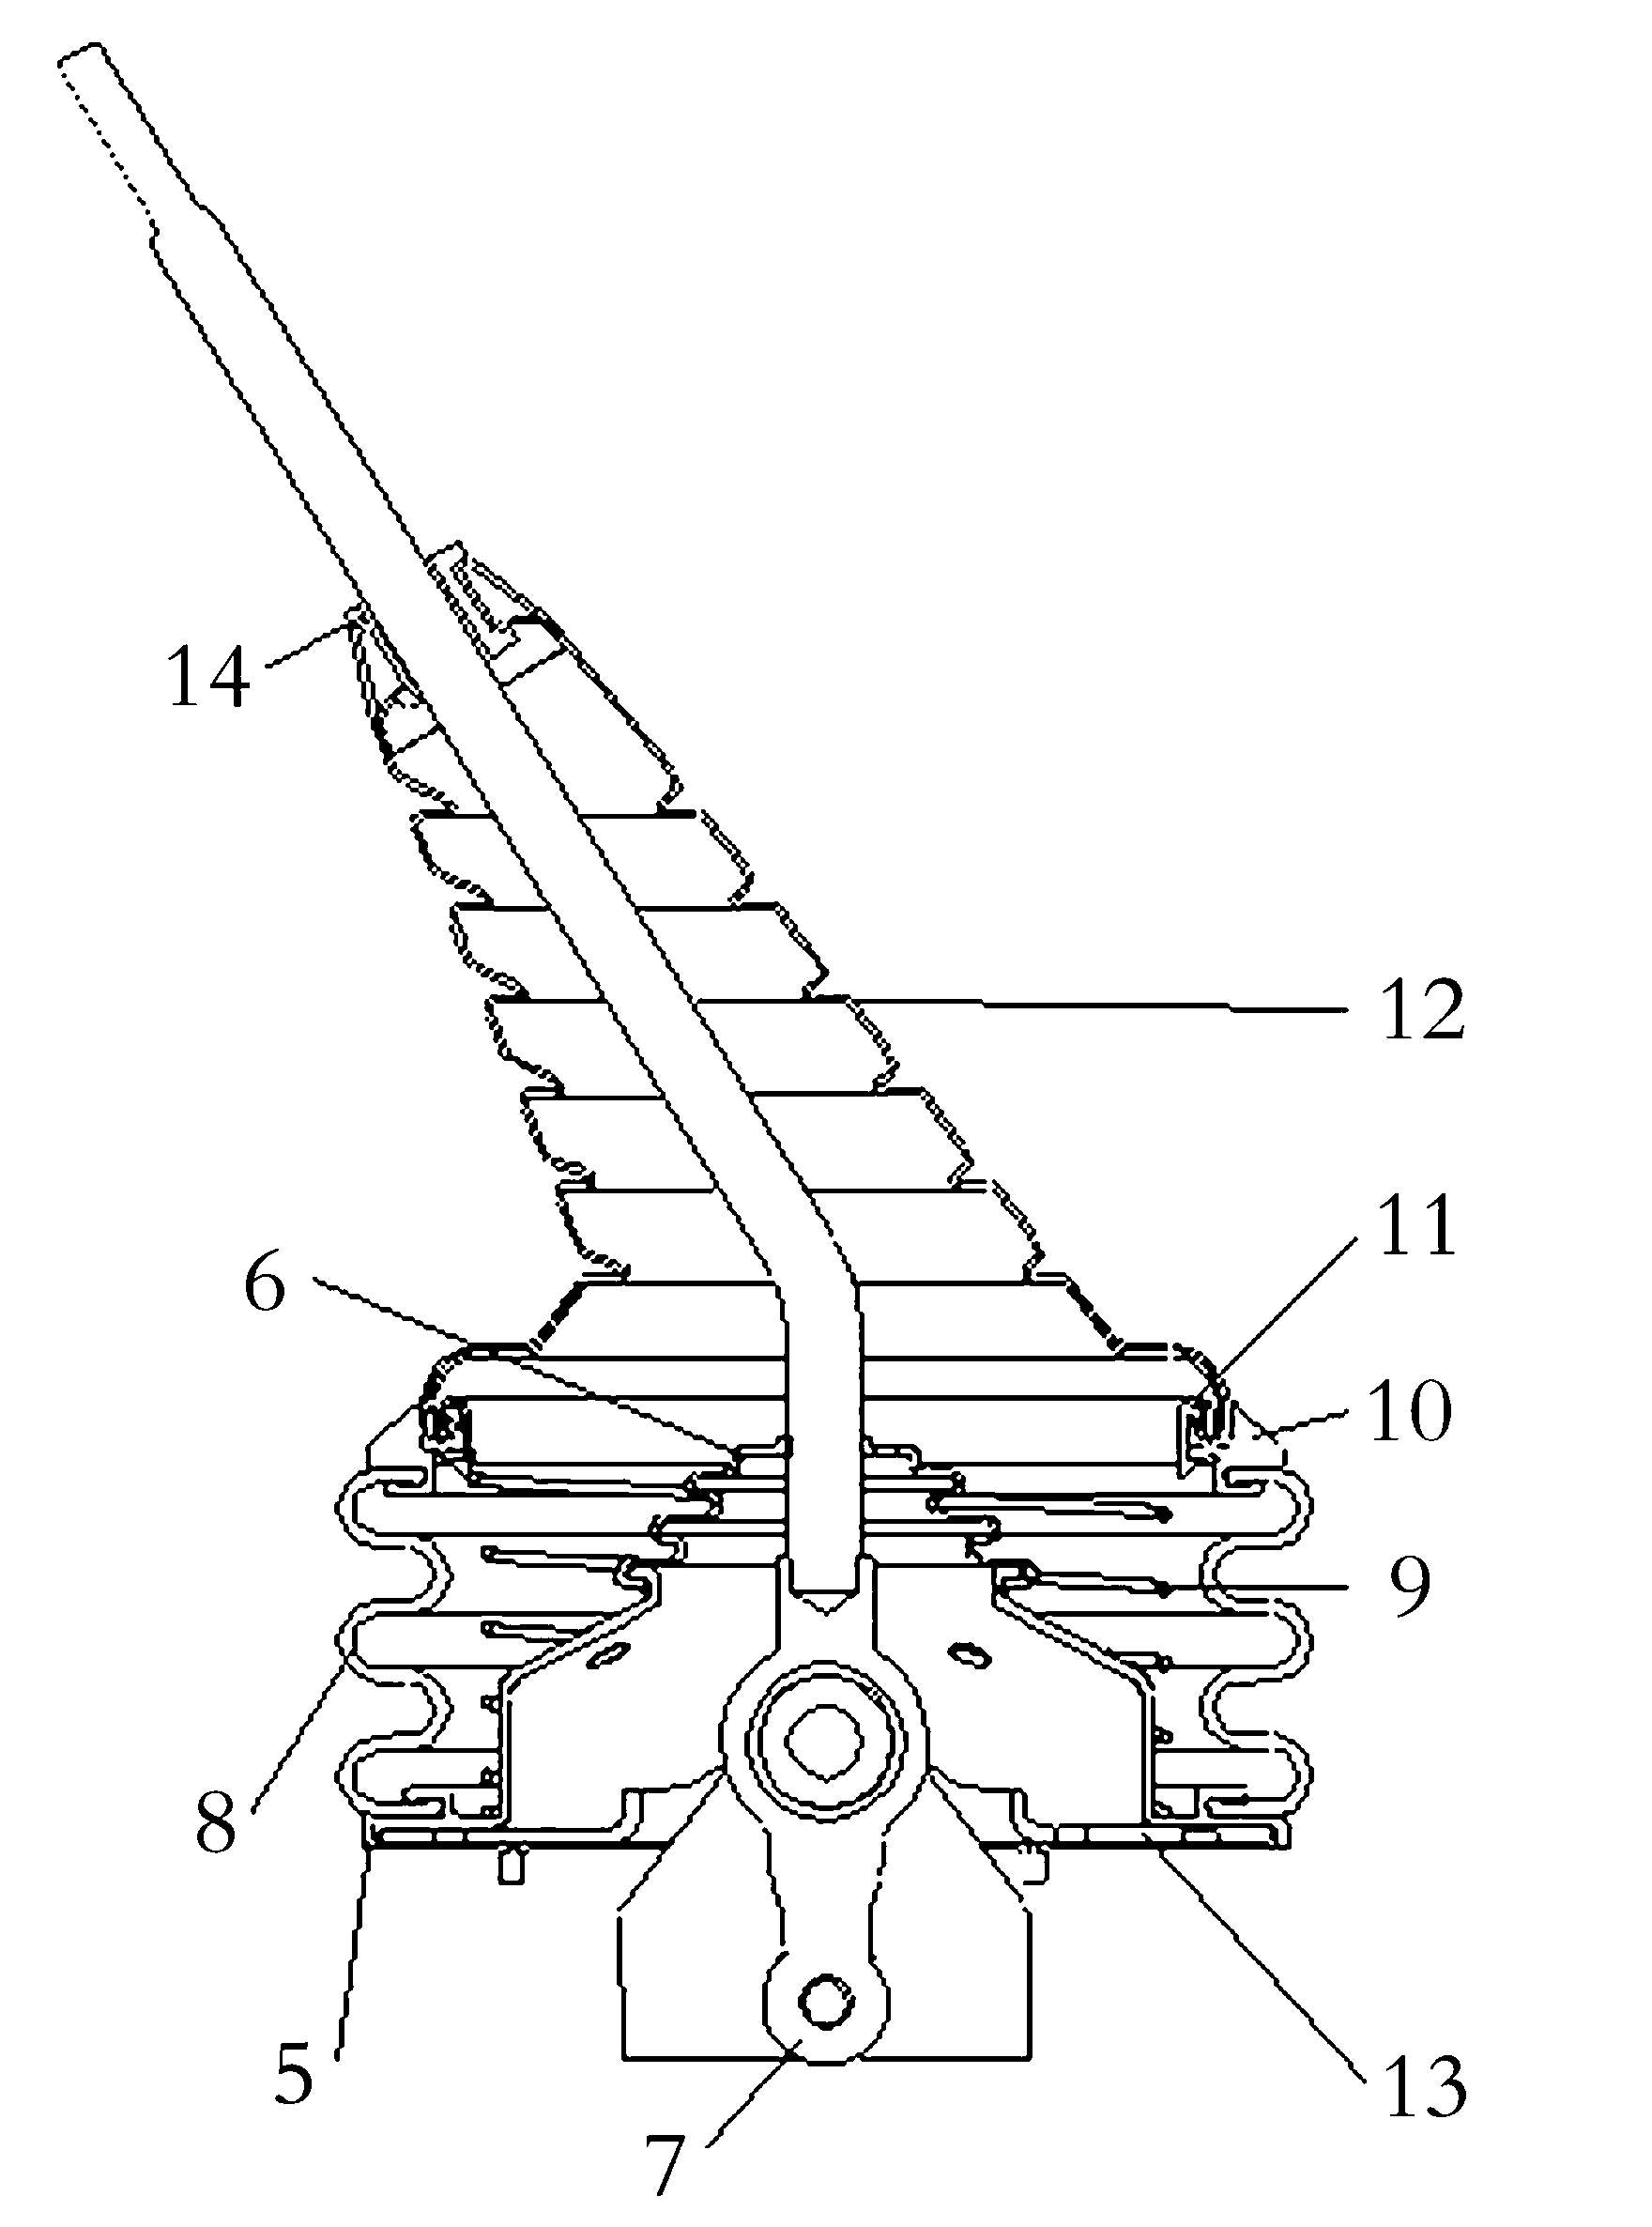 Shift handling mechanism with clearance automatic compensating device